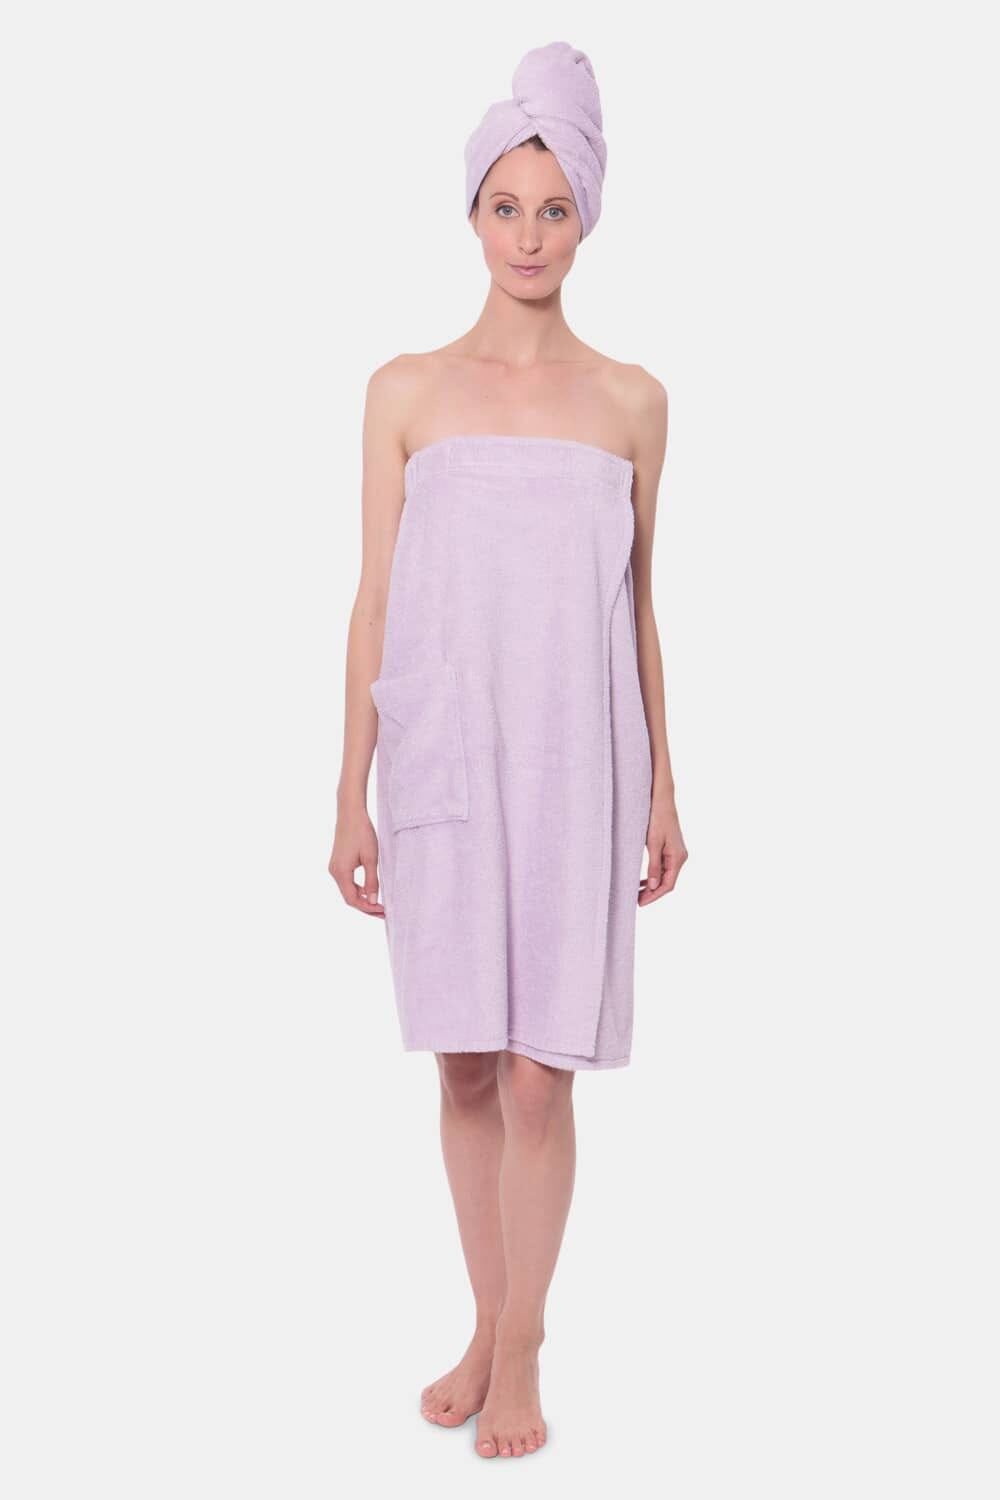 Texere Women's 2pc Terry Cloth Body and Hair Wrap Womens>Spa>Set Fishers Finery Lavender Fog S/M 